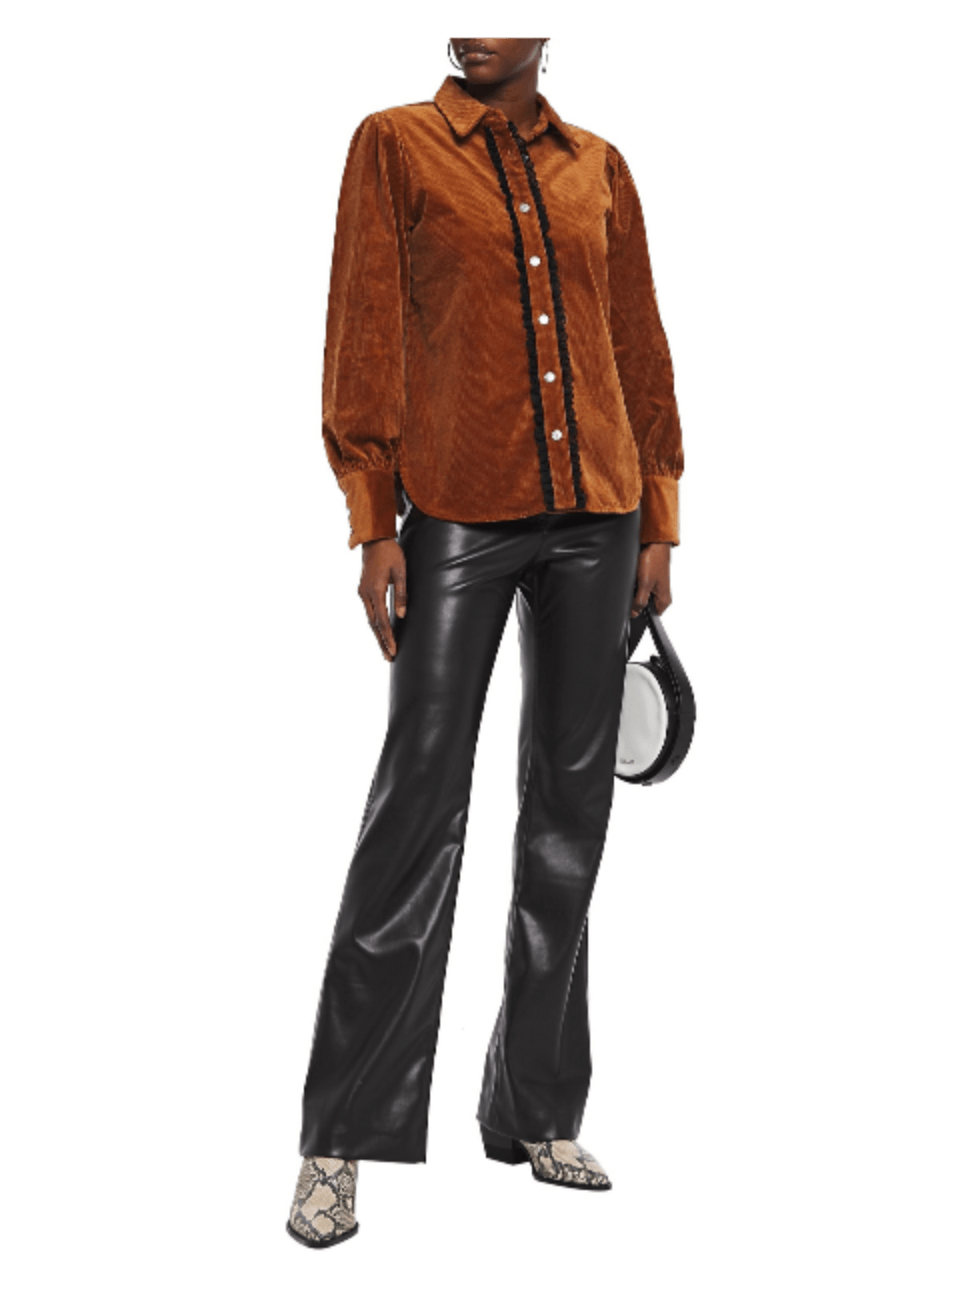 LACE-TRIMMED CORDUROY SHIRT - BROWN - codressing